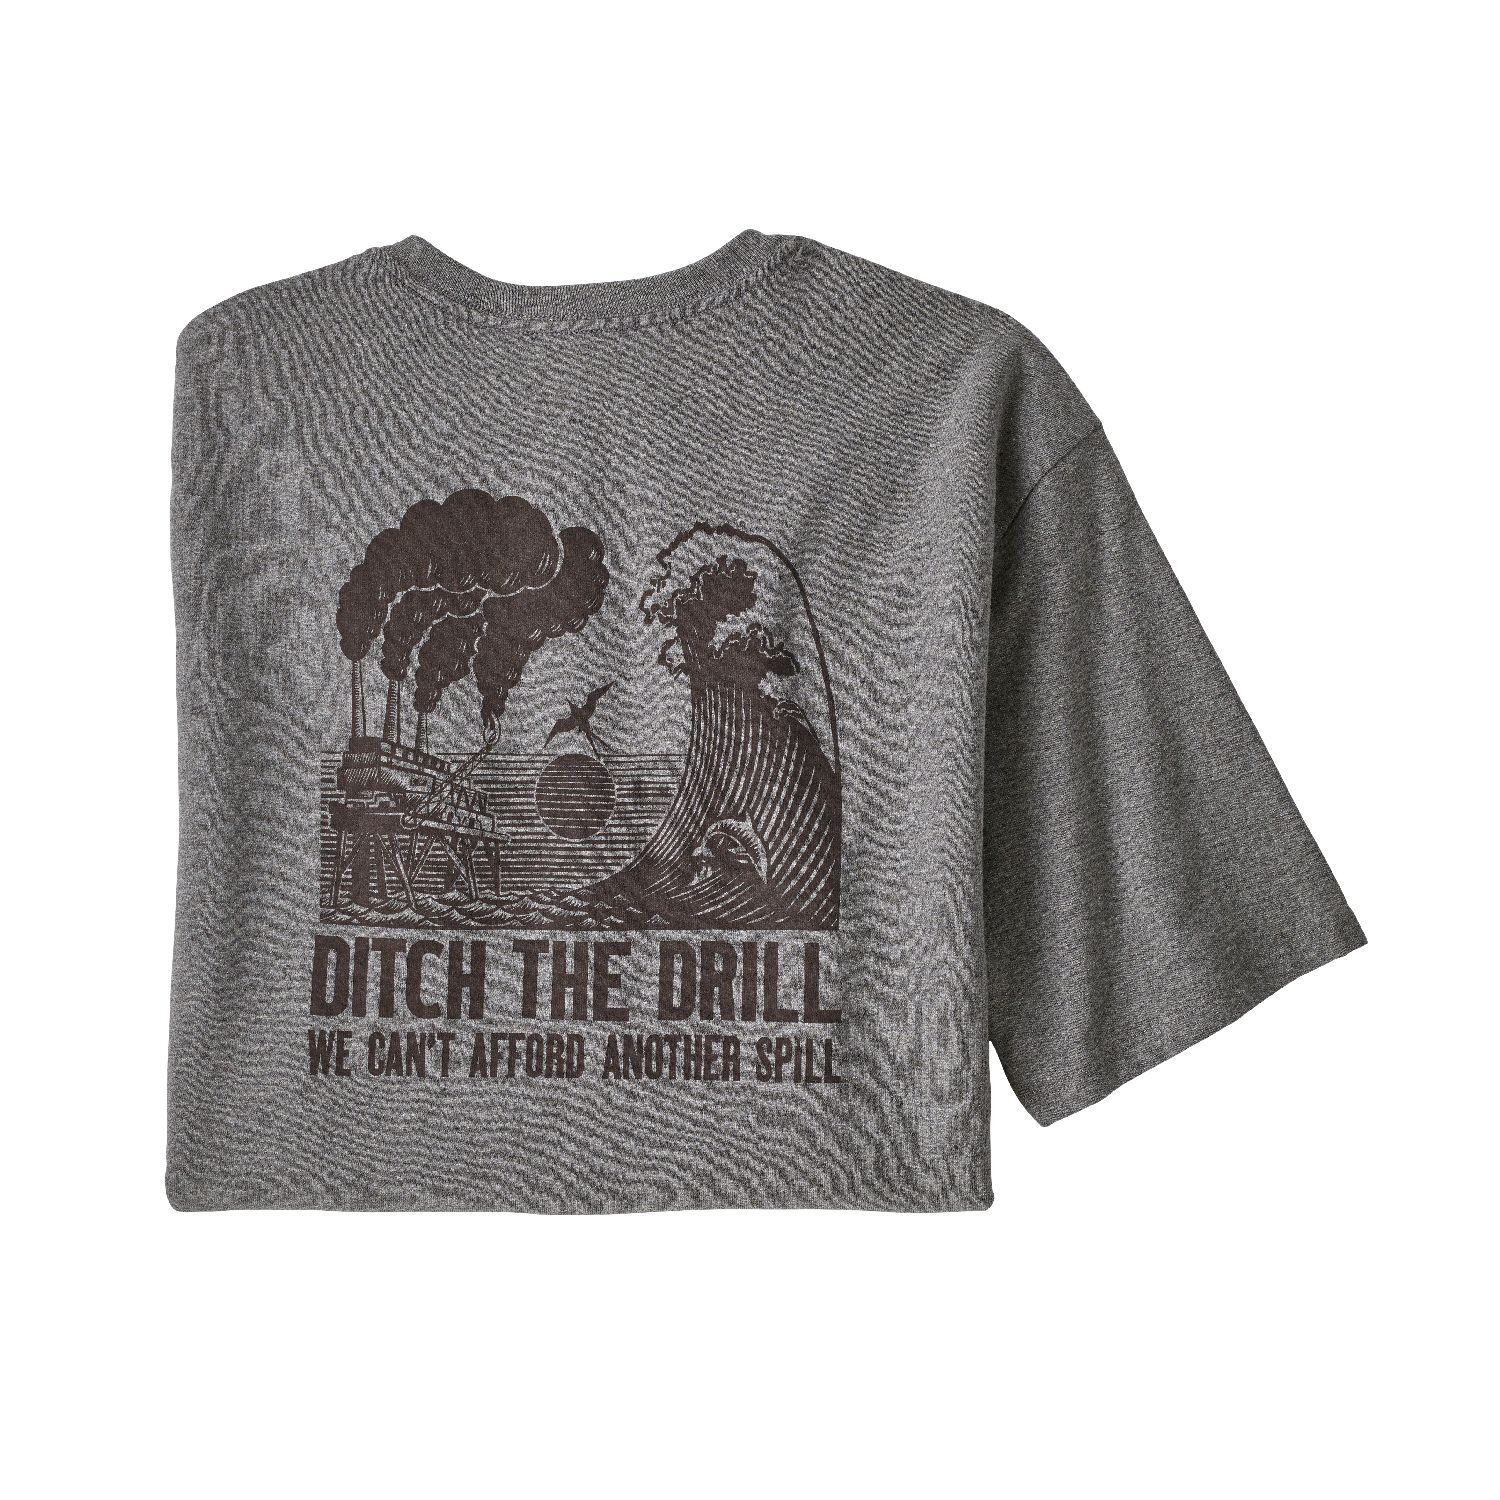 Patagonia Ditch The Drill Responsibili-Tee - T-shirt Herr